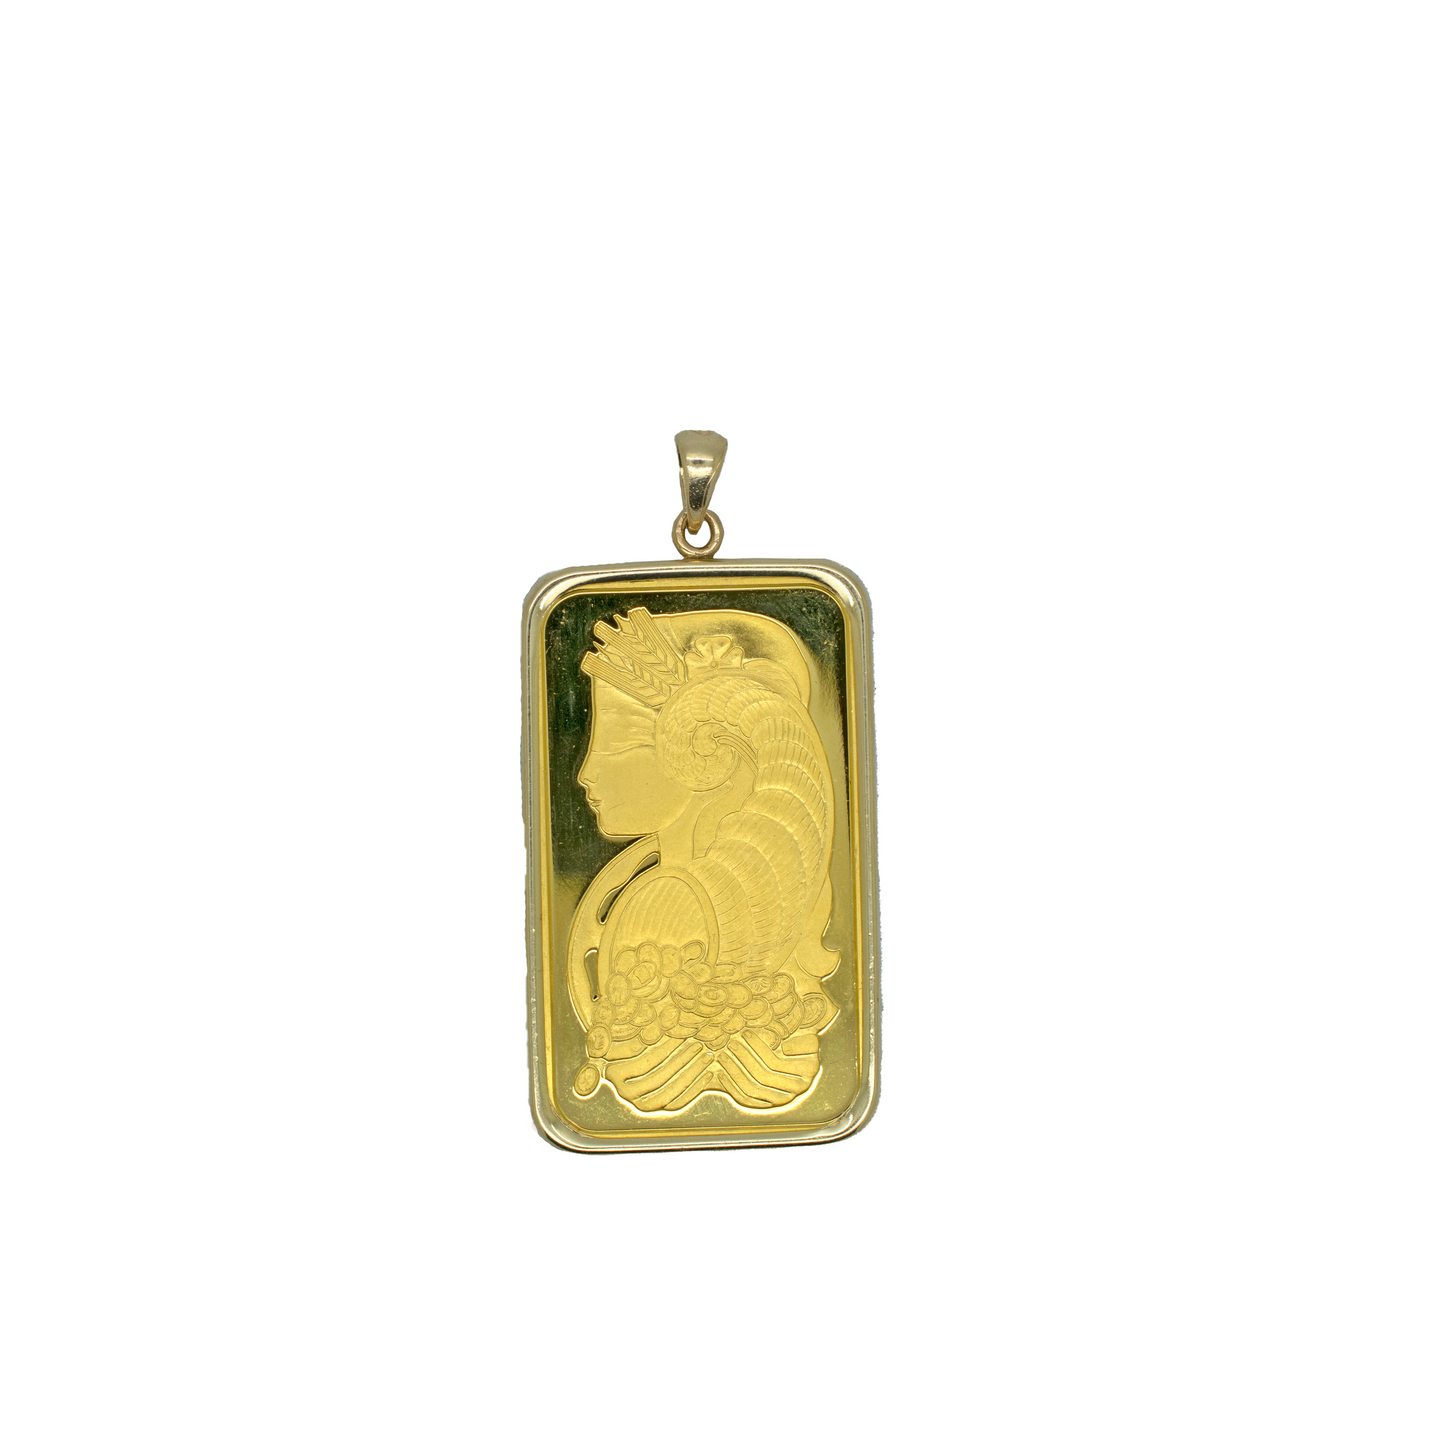 24k Gold Pamp 31.1g with 14k Border